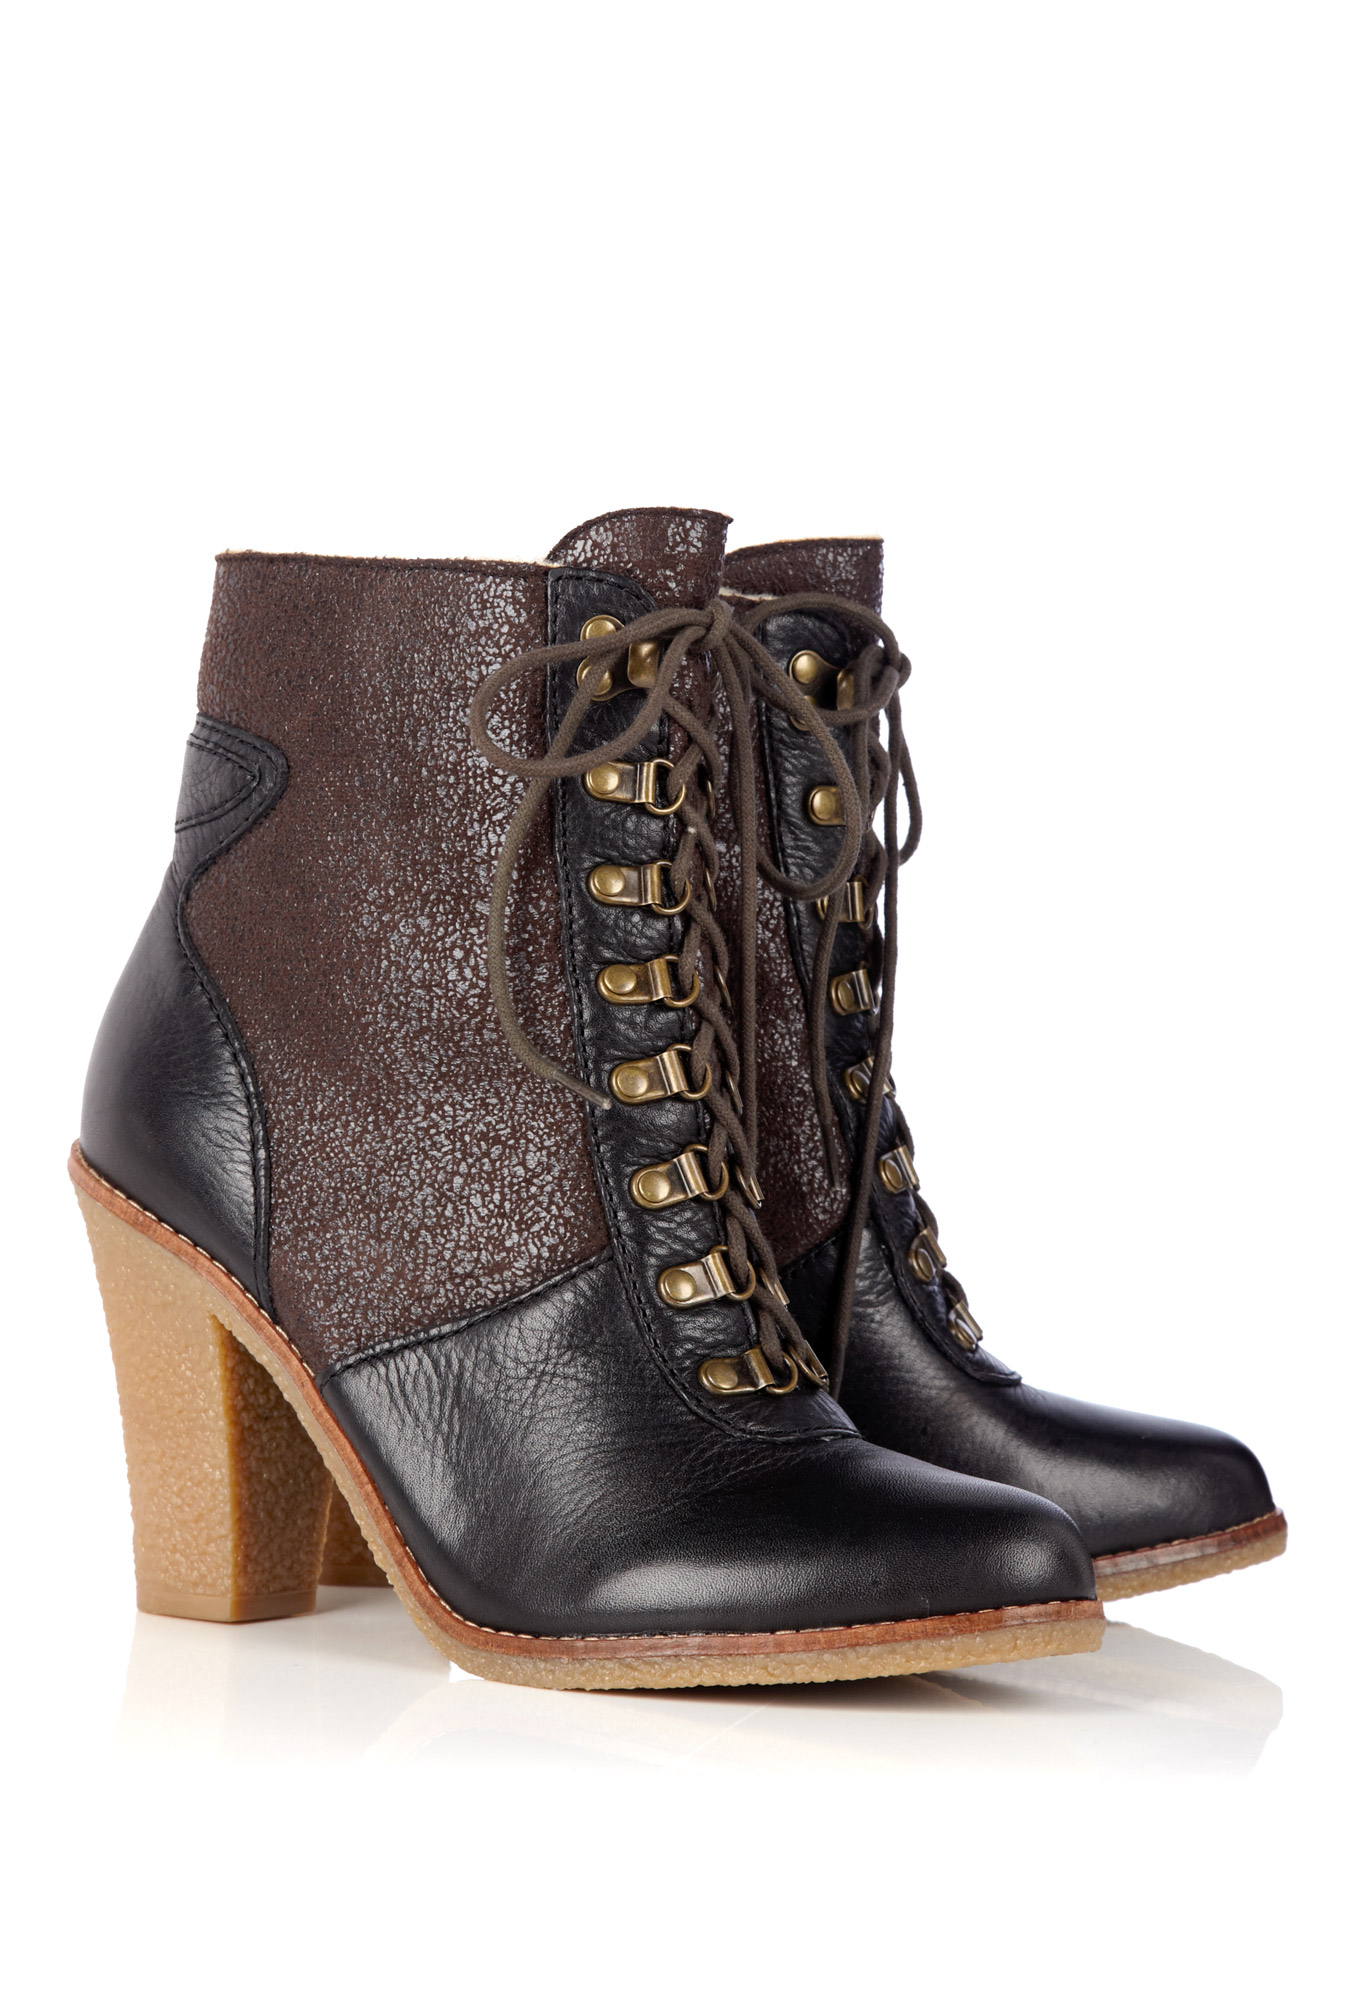 Sam edelman Tara Two-tone Leather and Shearling Ankle Boots in Brown ...